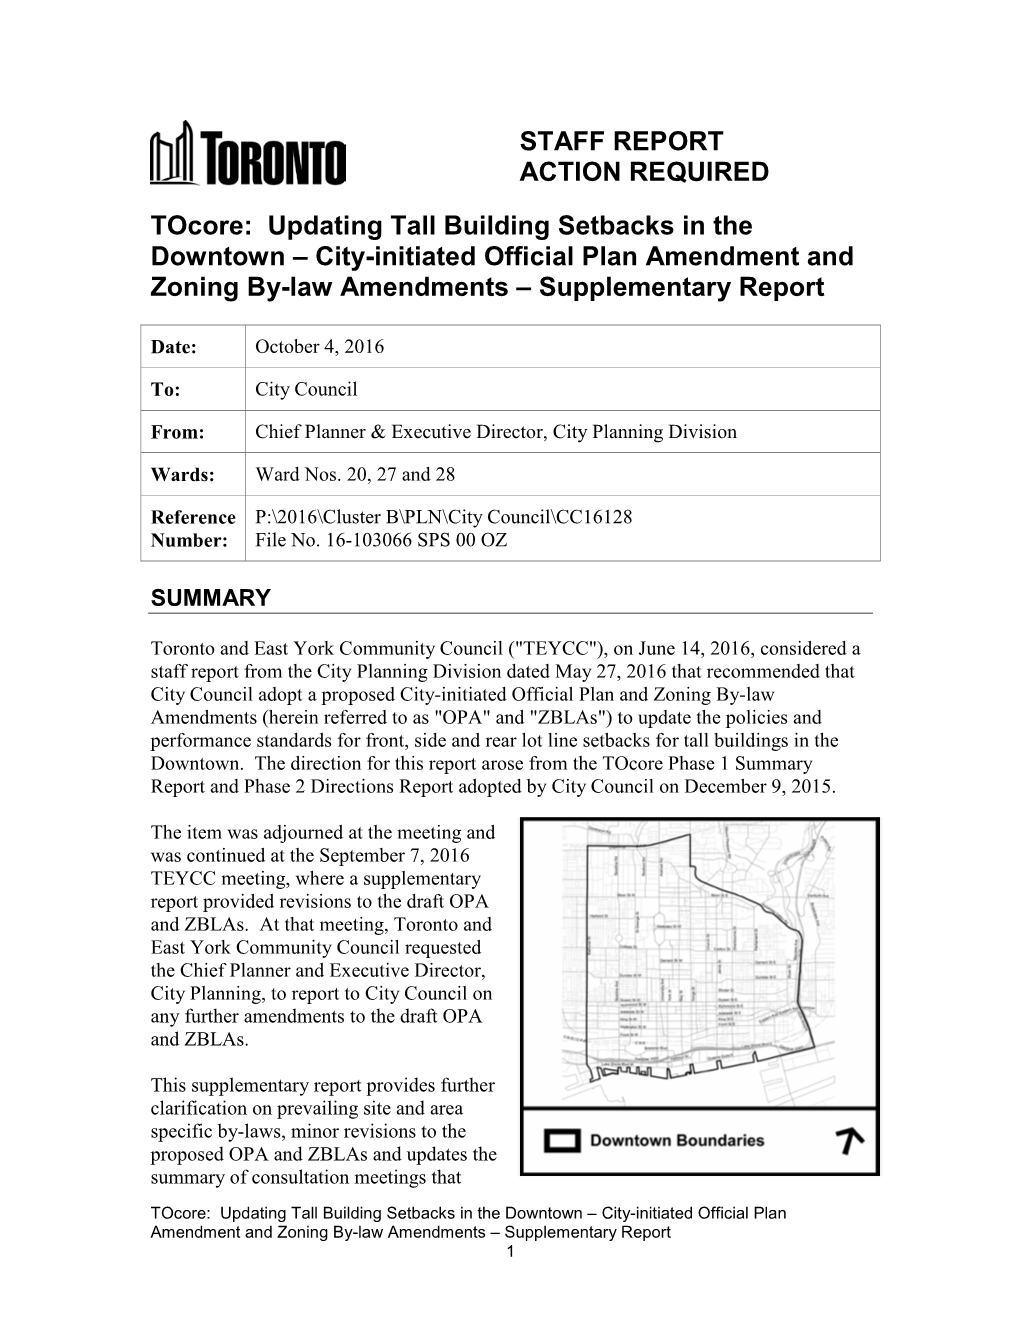 Updating Tall Building Setbacks in the Downtown – City-Initiated Official Plan Amendment and Zoning By-Law Amendments – Supplementary Report